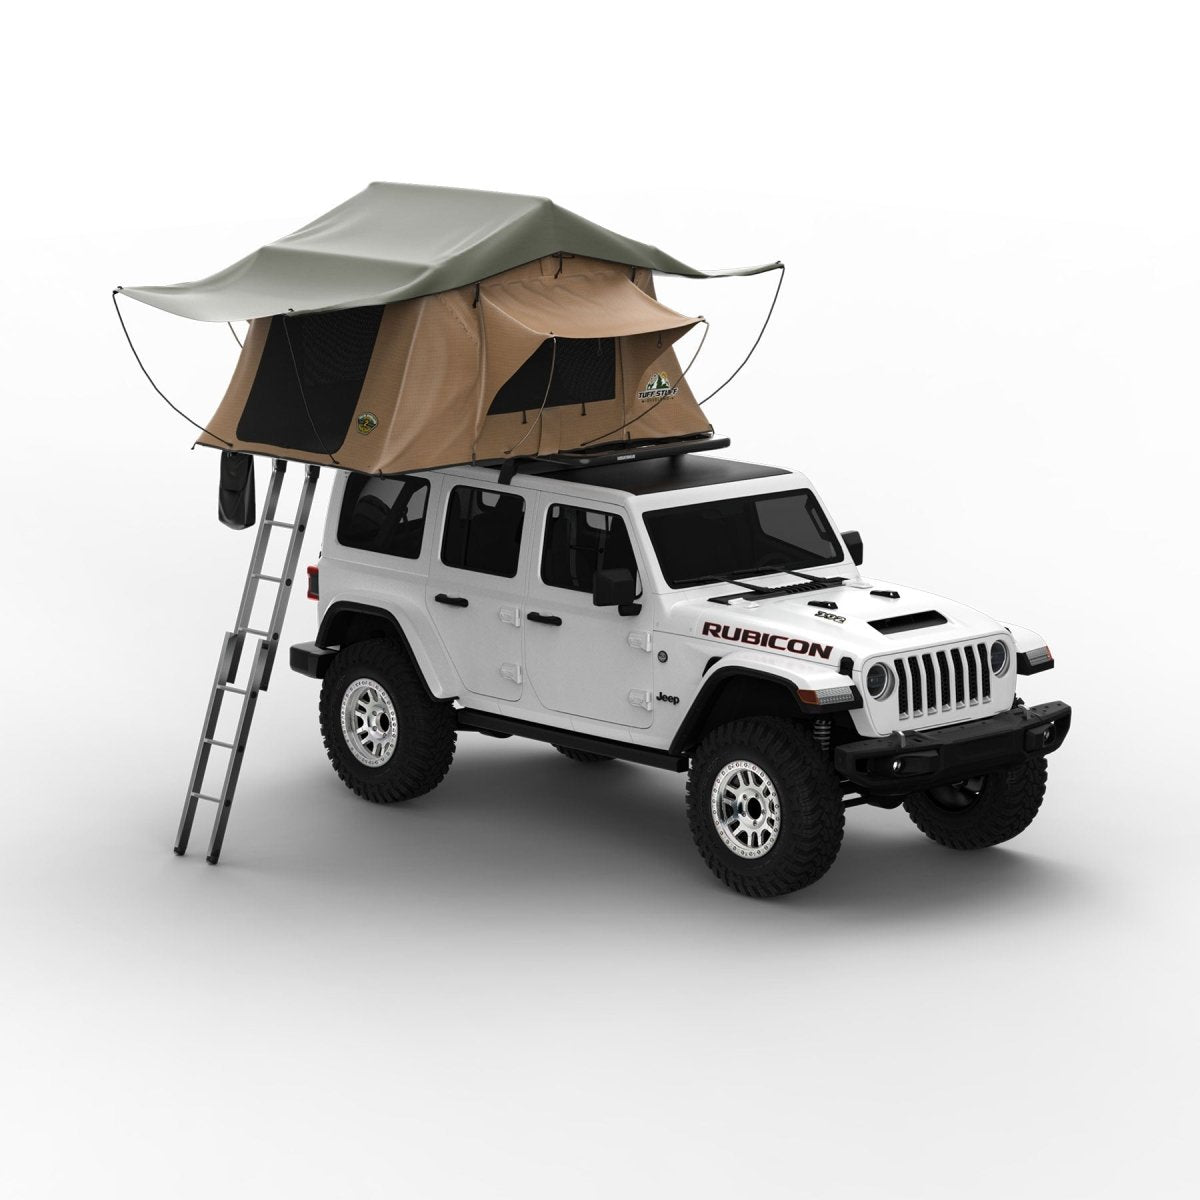 Tuff Stuff® ''Delta'' Overland Roof Top Tent, 2 Person - Tuff Stuff Overland - Roof Top Tent